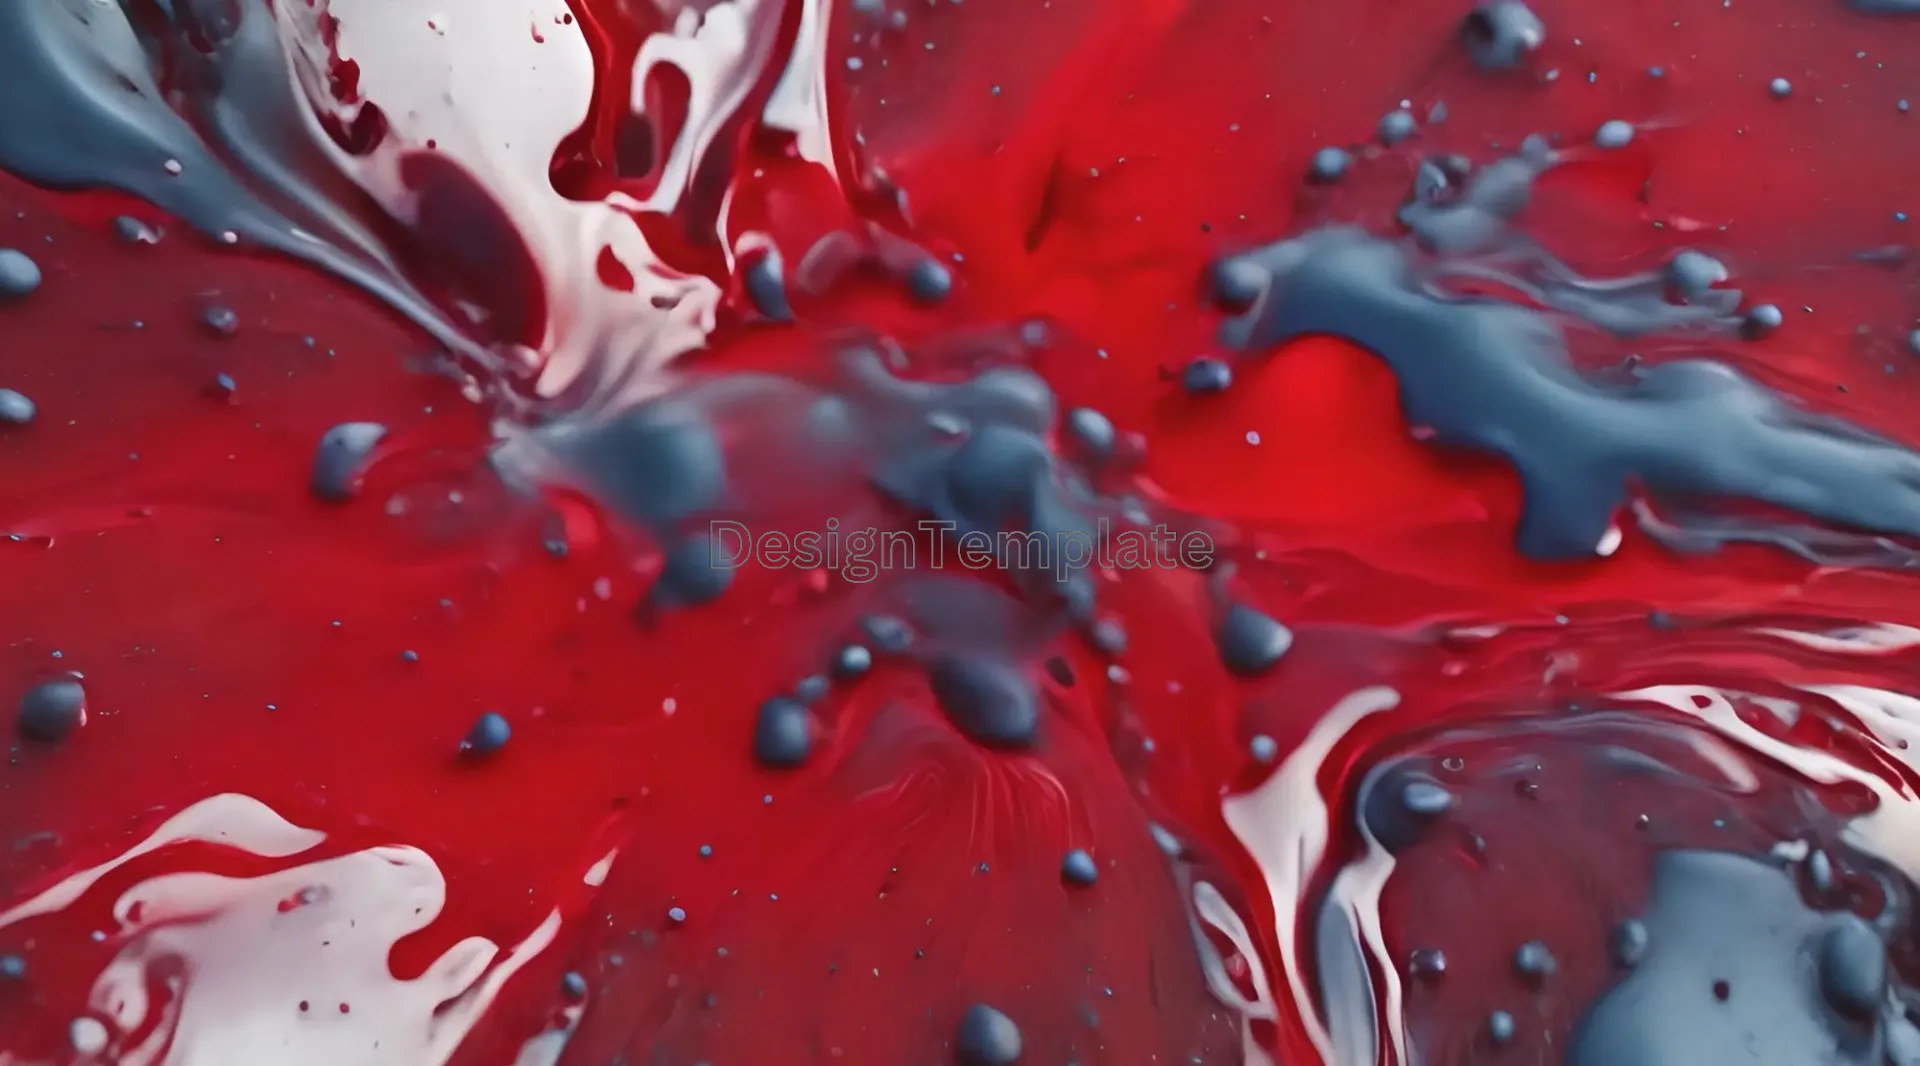 Cinematic Red and Gray Fluid Dynamics Video Clip